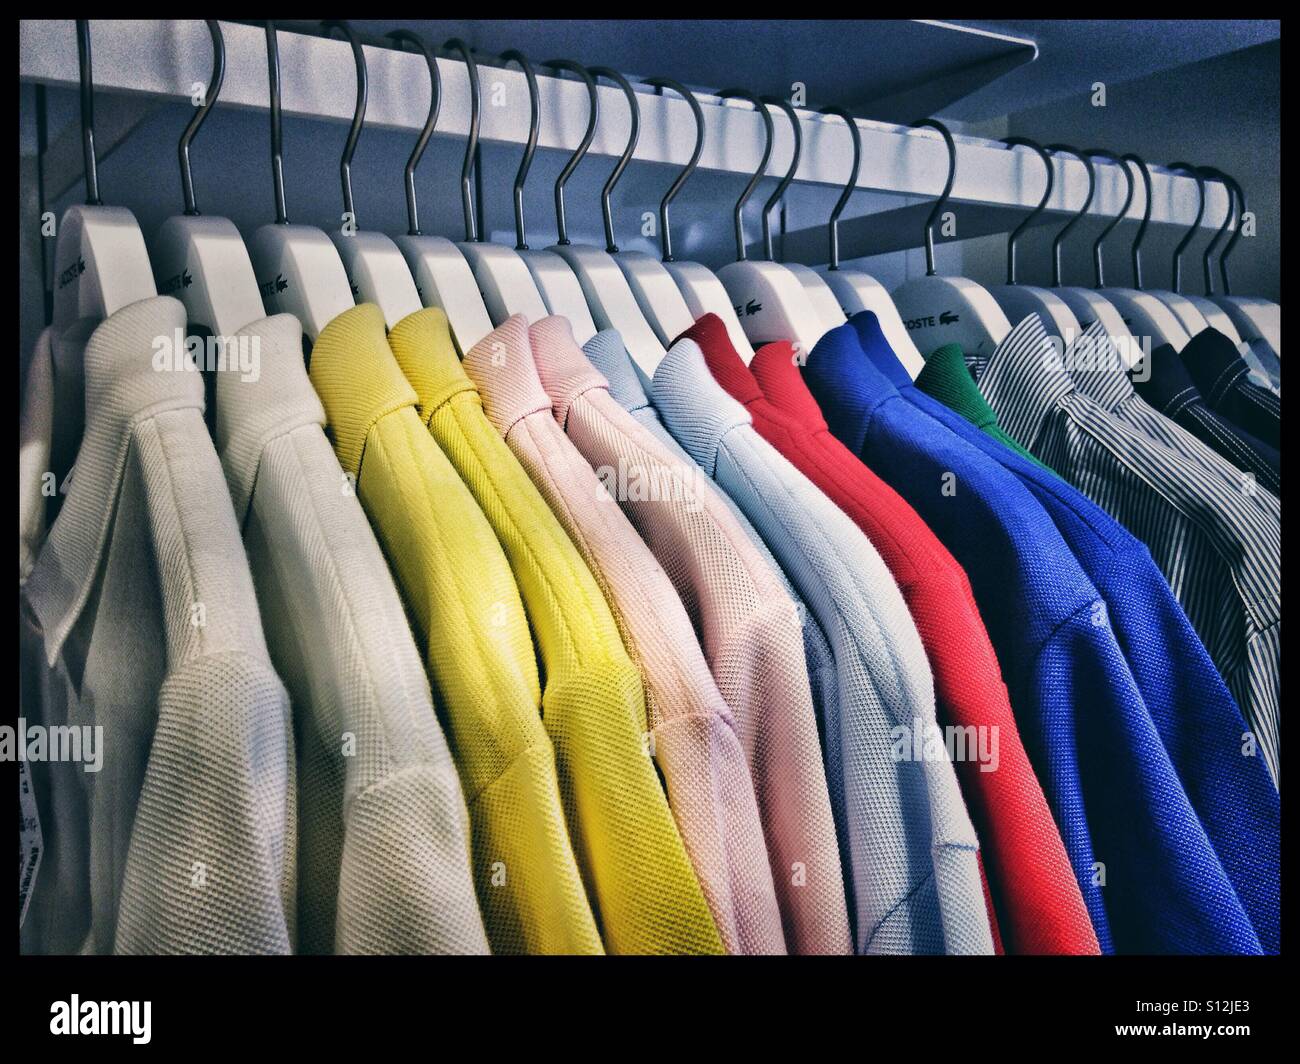 T-shirts hanging on hangers Stock Photo by ©geargodz 43837489